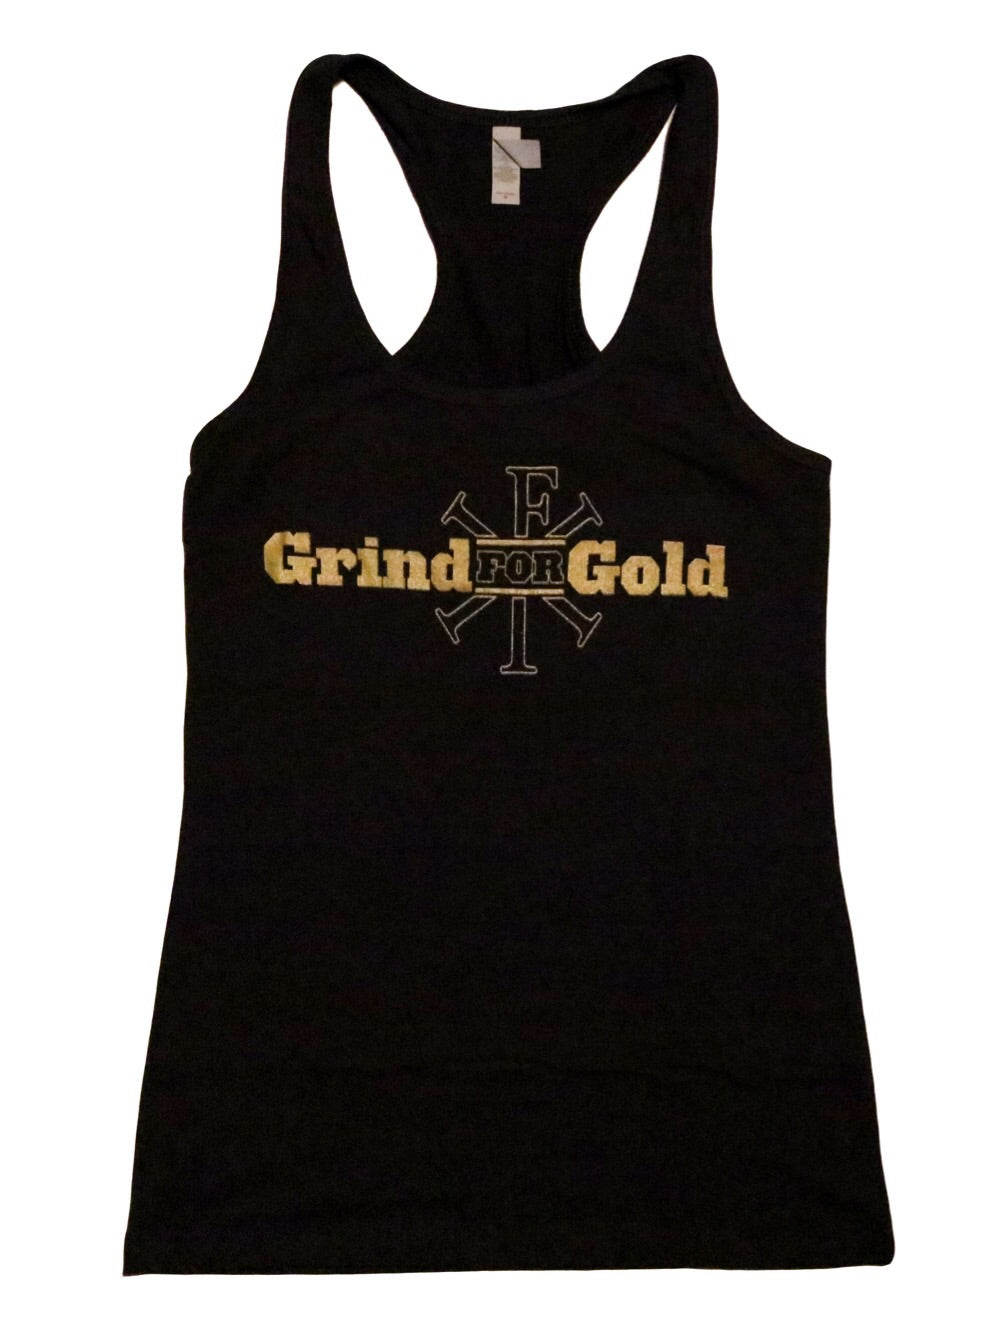 Grind for Gold women's tank